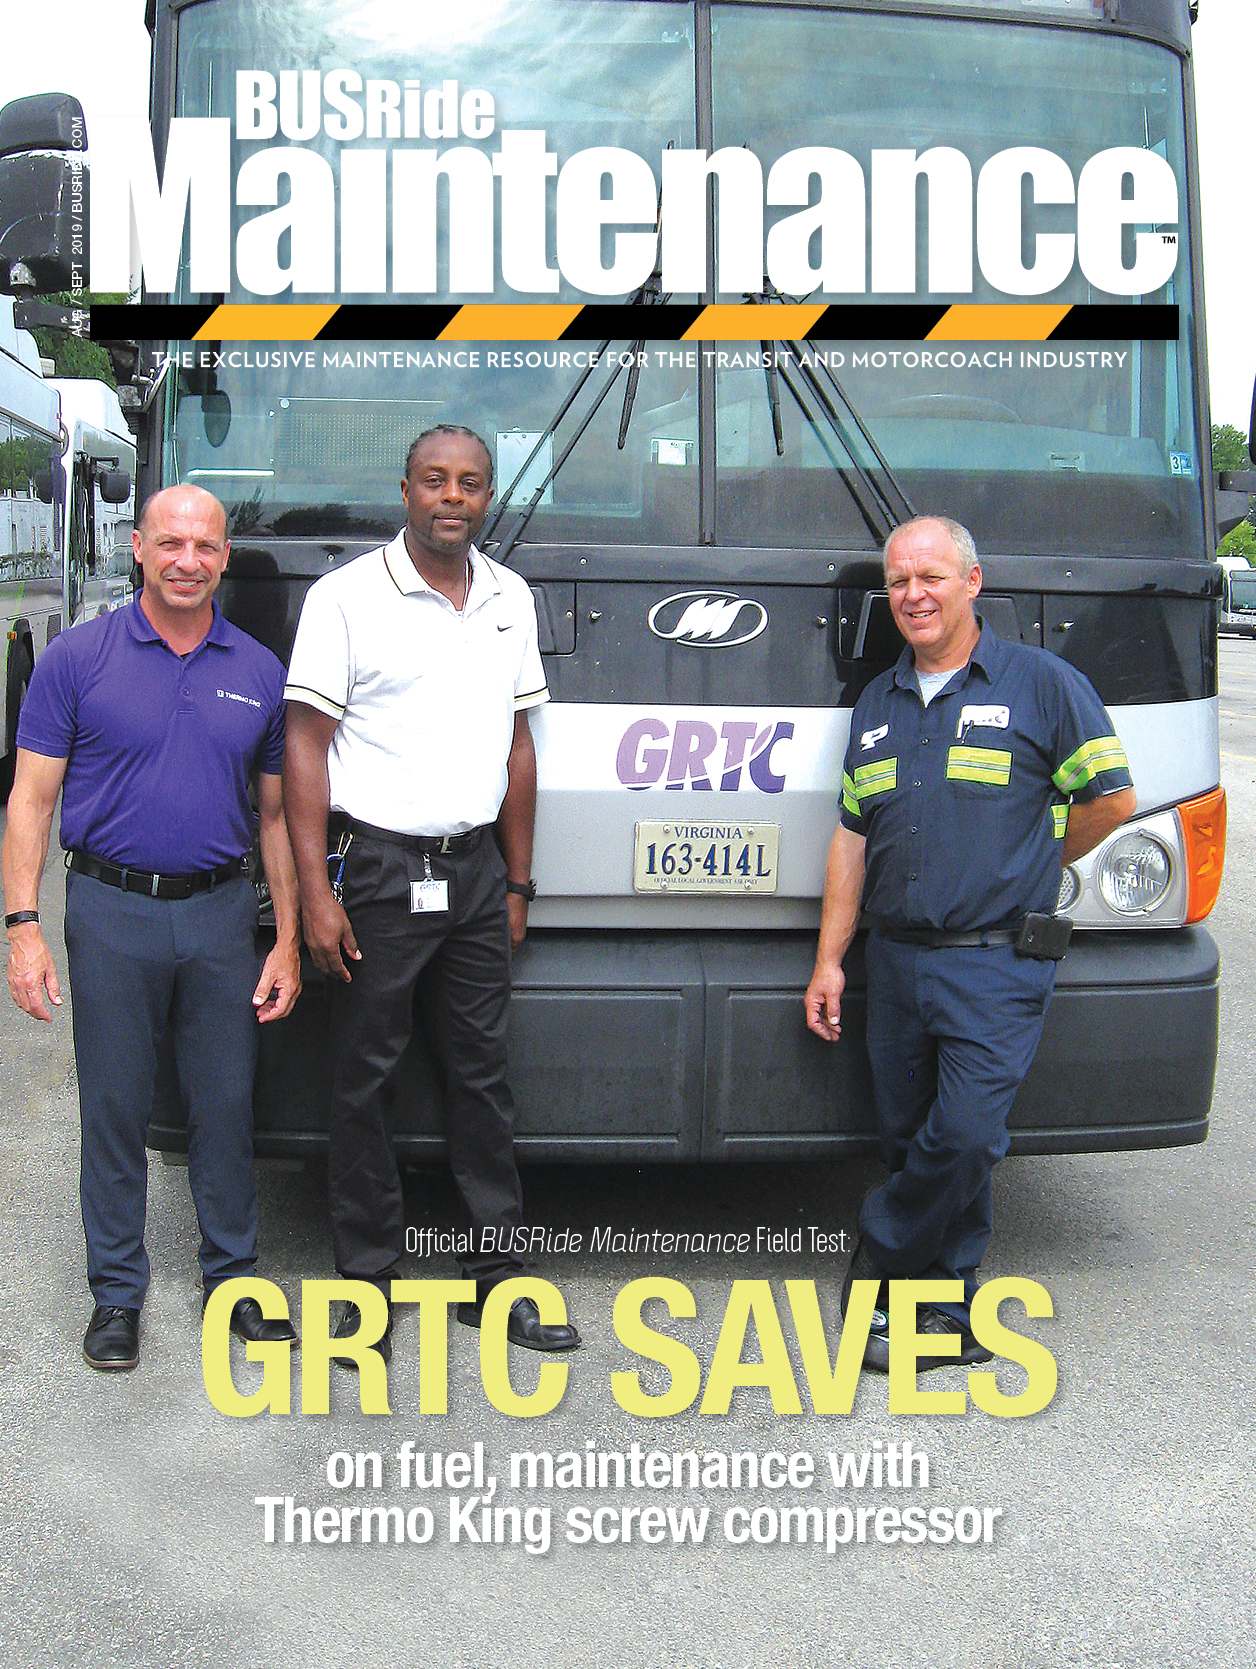 GRTC saves on fuel, maintenance with Thermo King screw compressor